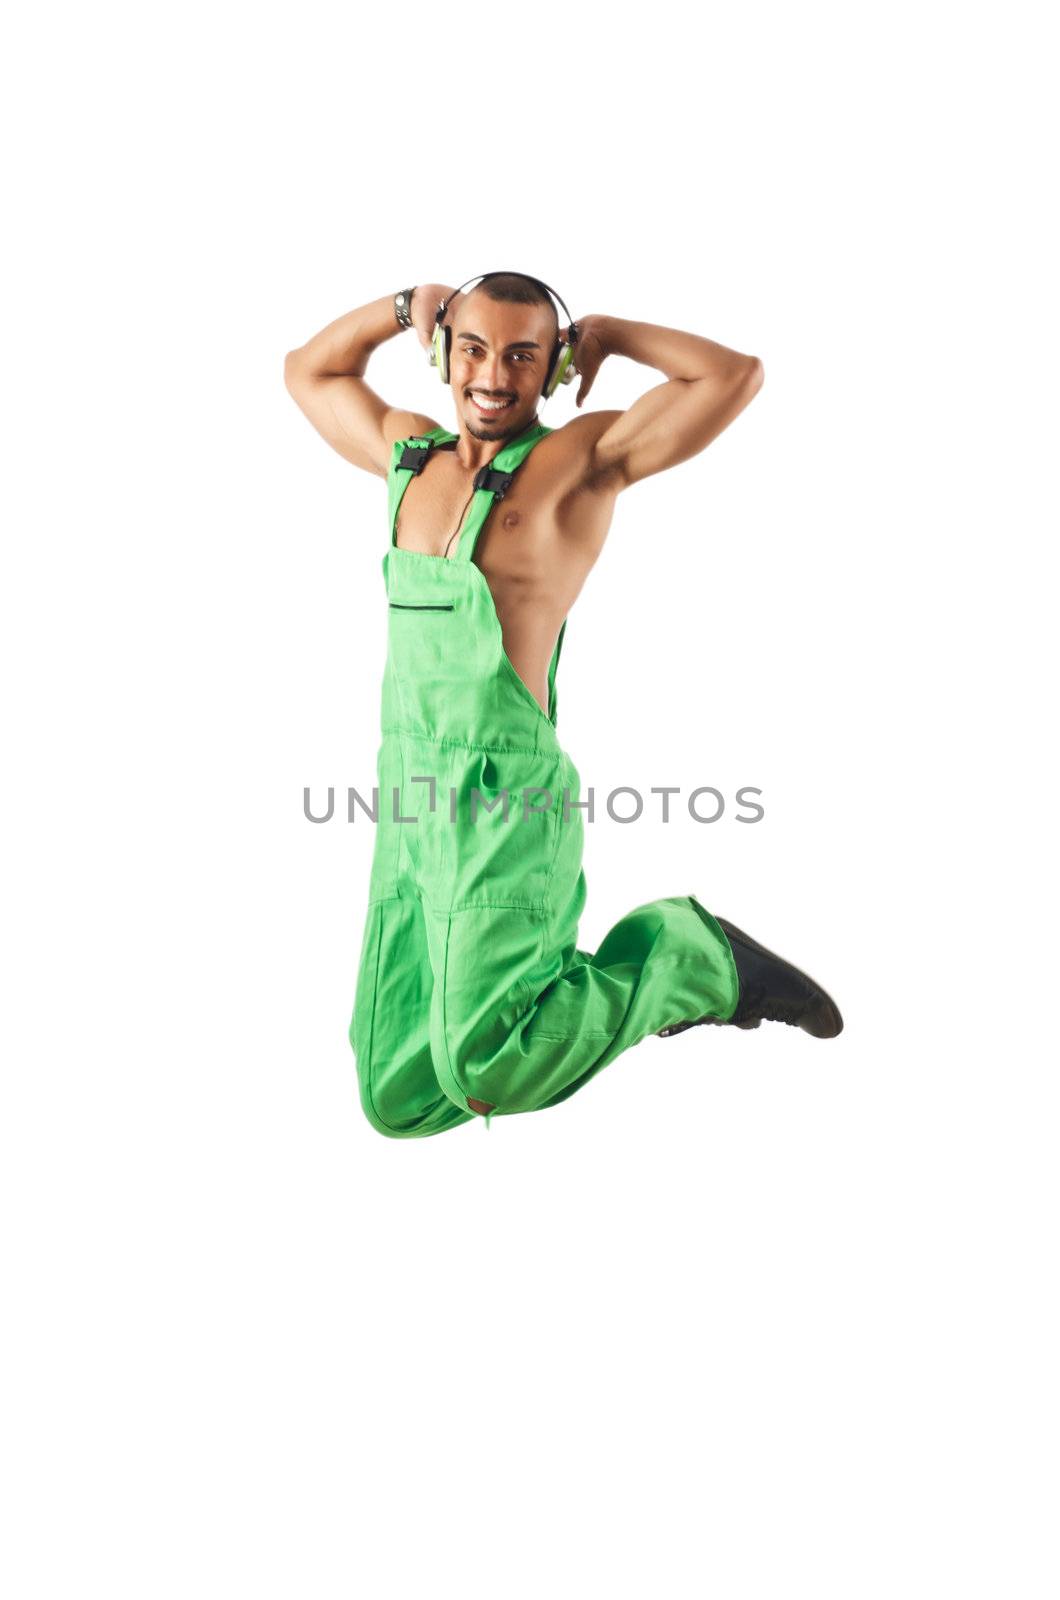 Construction worker jumping and dancing by Elnur